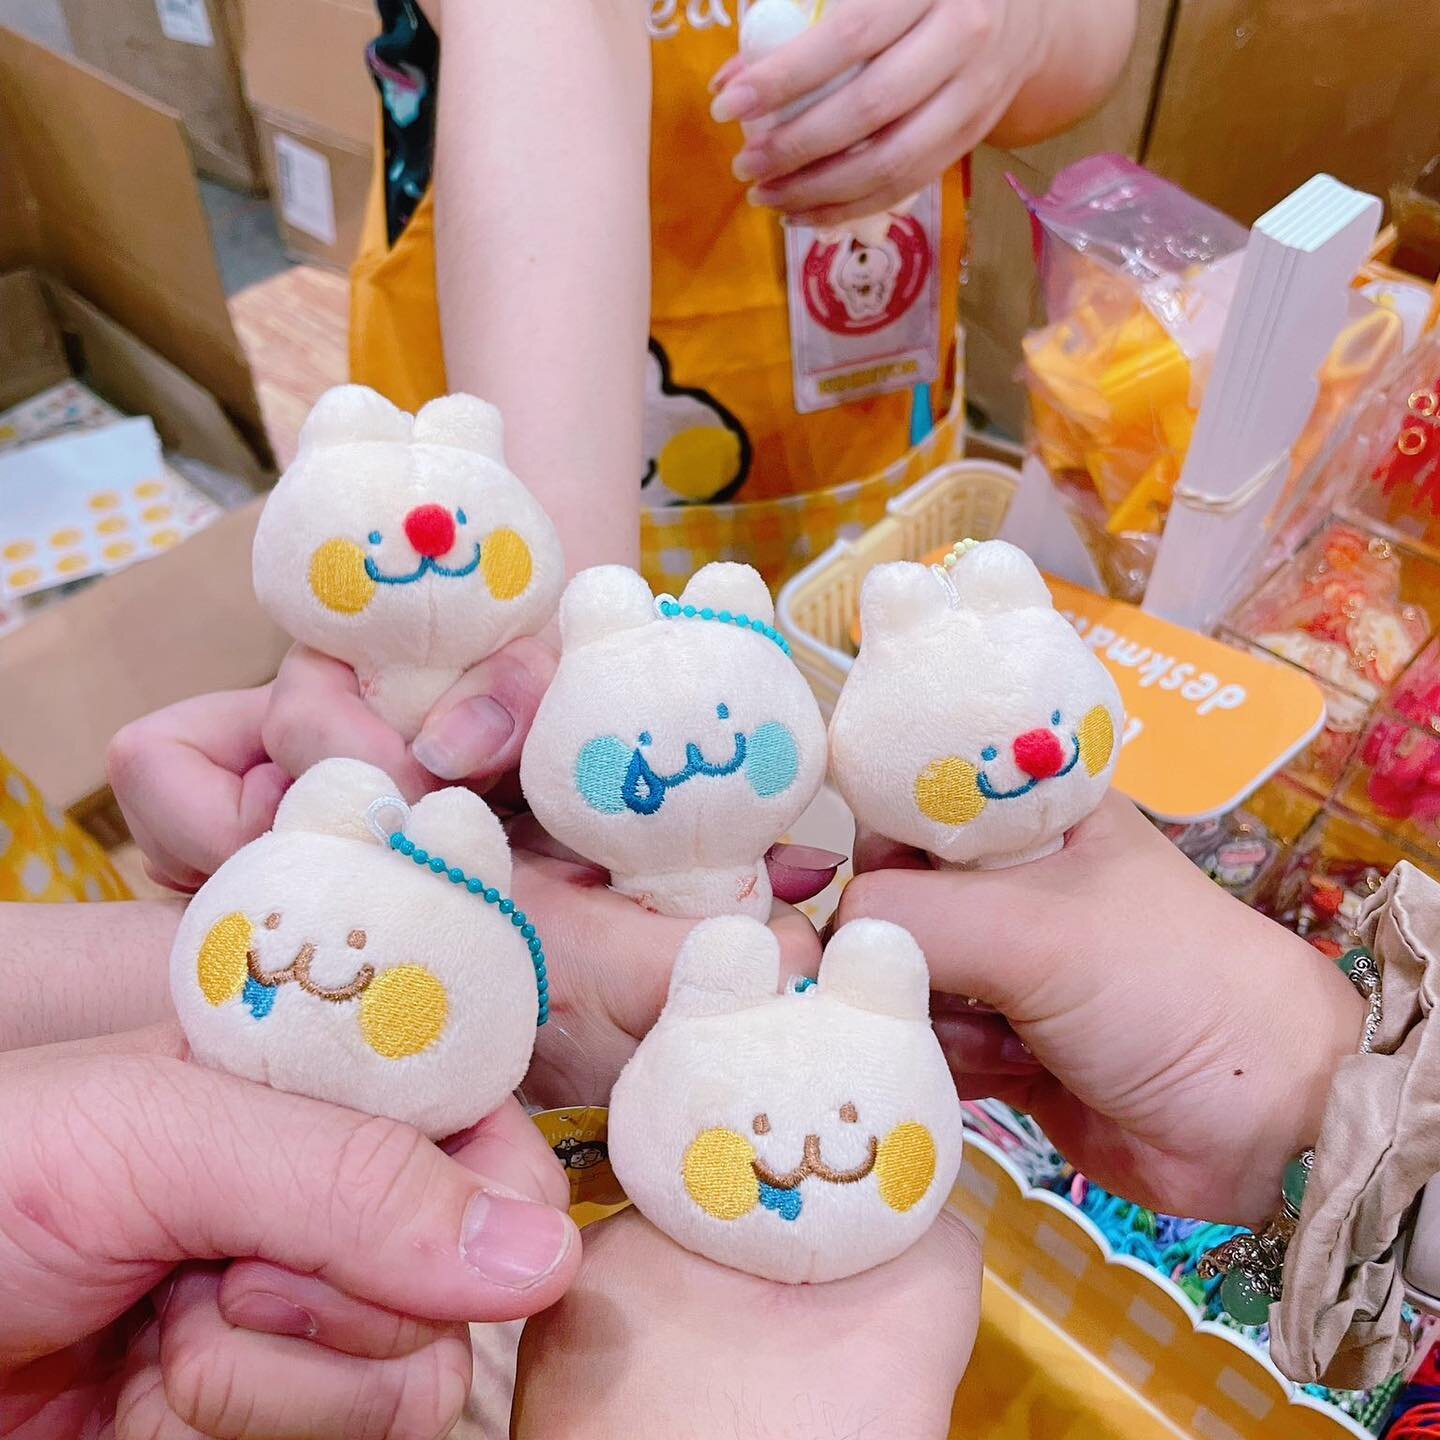 compilation of photos people sent me of their bun death grips (the only way to properly hold them)

no surprise to anyone, the most popular armless bun gachapon during anime expo was clown bun 🤡 
&mdash;
🏷️
#plushies #gachapon